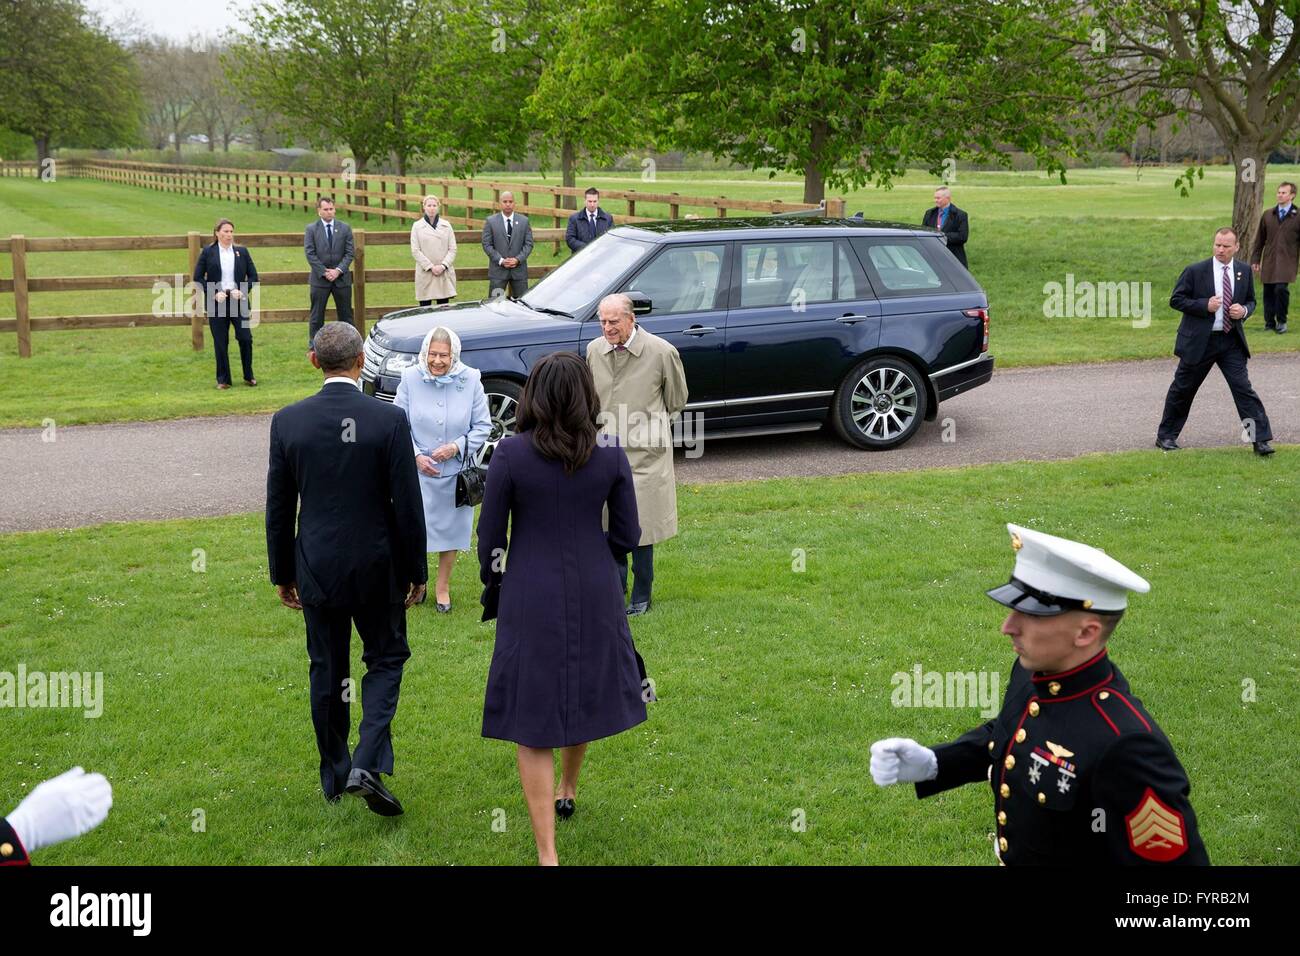 Queen Elizabeth II and Prince Philip, Duke of Edinburgh, greet U.S President Barack Obama and First Lady Michelle Obama as they arrive for lunch at Windsor Castle April 22, 2016 in Windsor, United Kingdom. Stock Photo